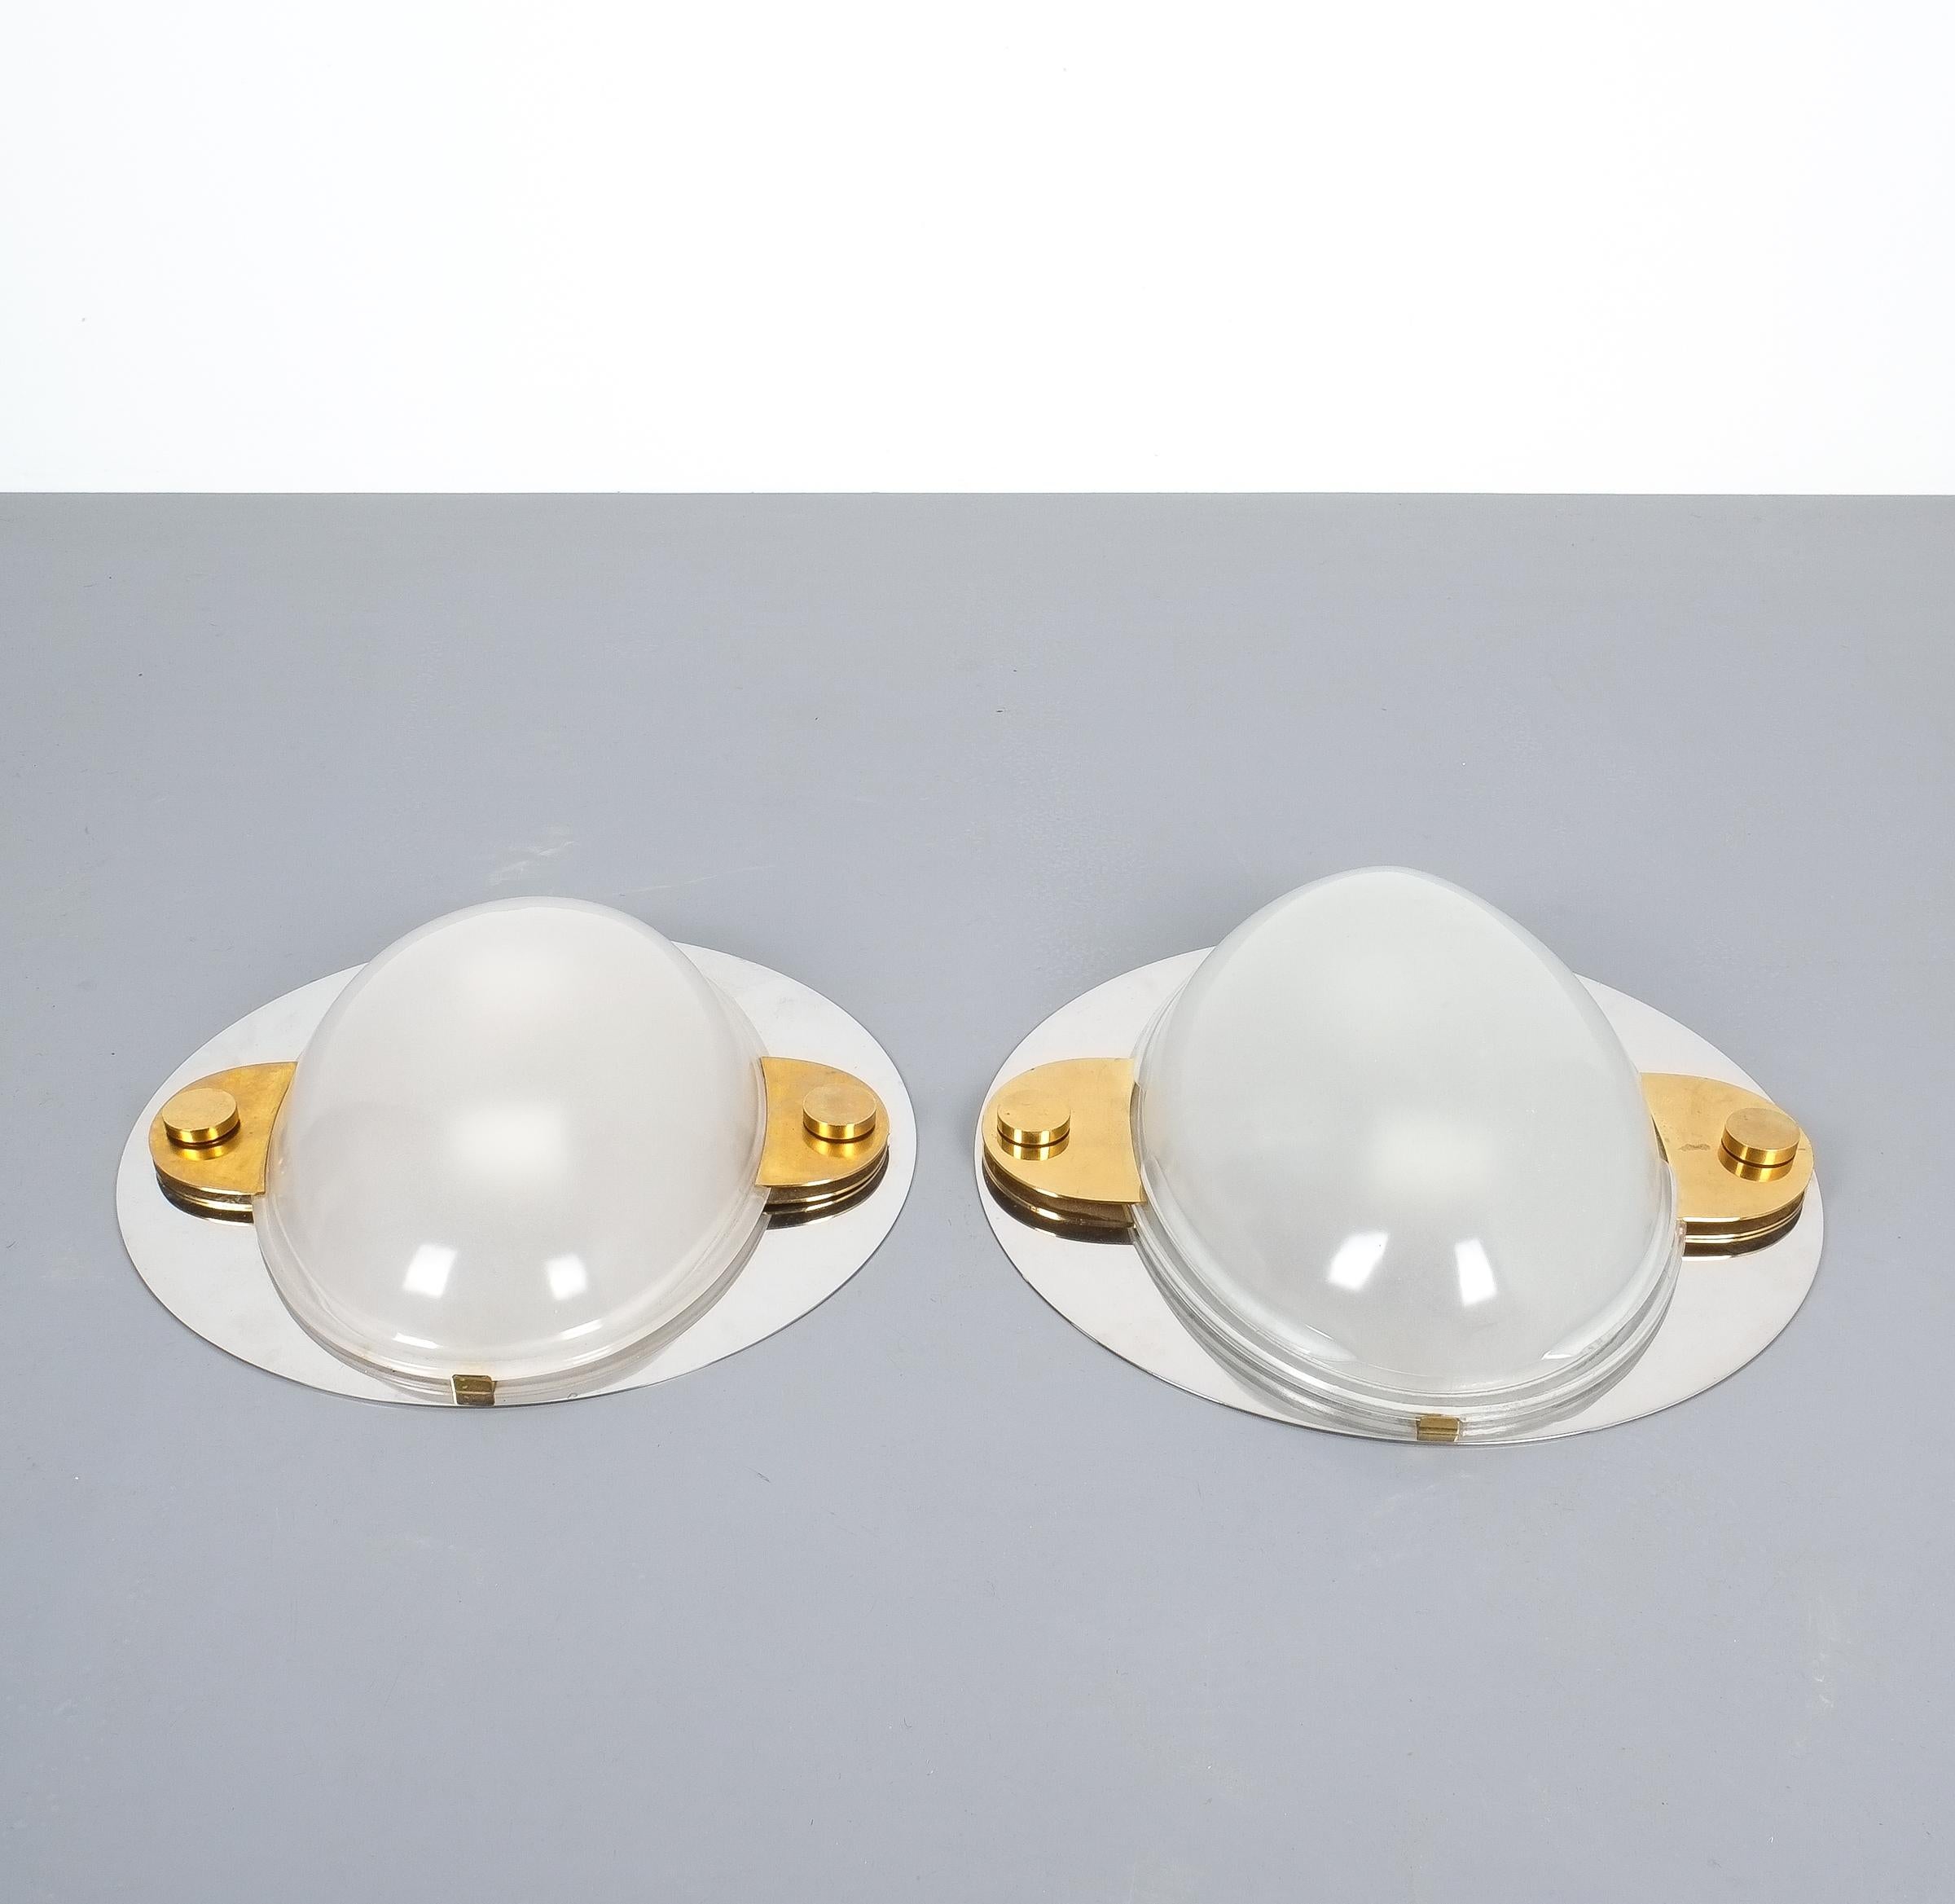 Luigi Caccia Dominioni flush mounts or sconces brass chrome glass, circa 1978. 

Pair of rare and large wall lights or ceiling lights comprised of chromed brass, brass and opaline glass. We have a pair that slightly differs in size. Dimensions are